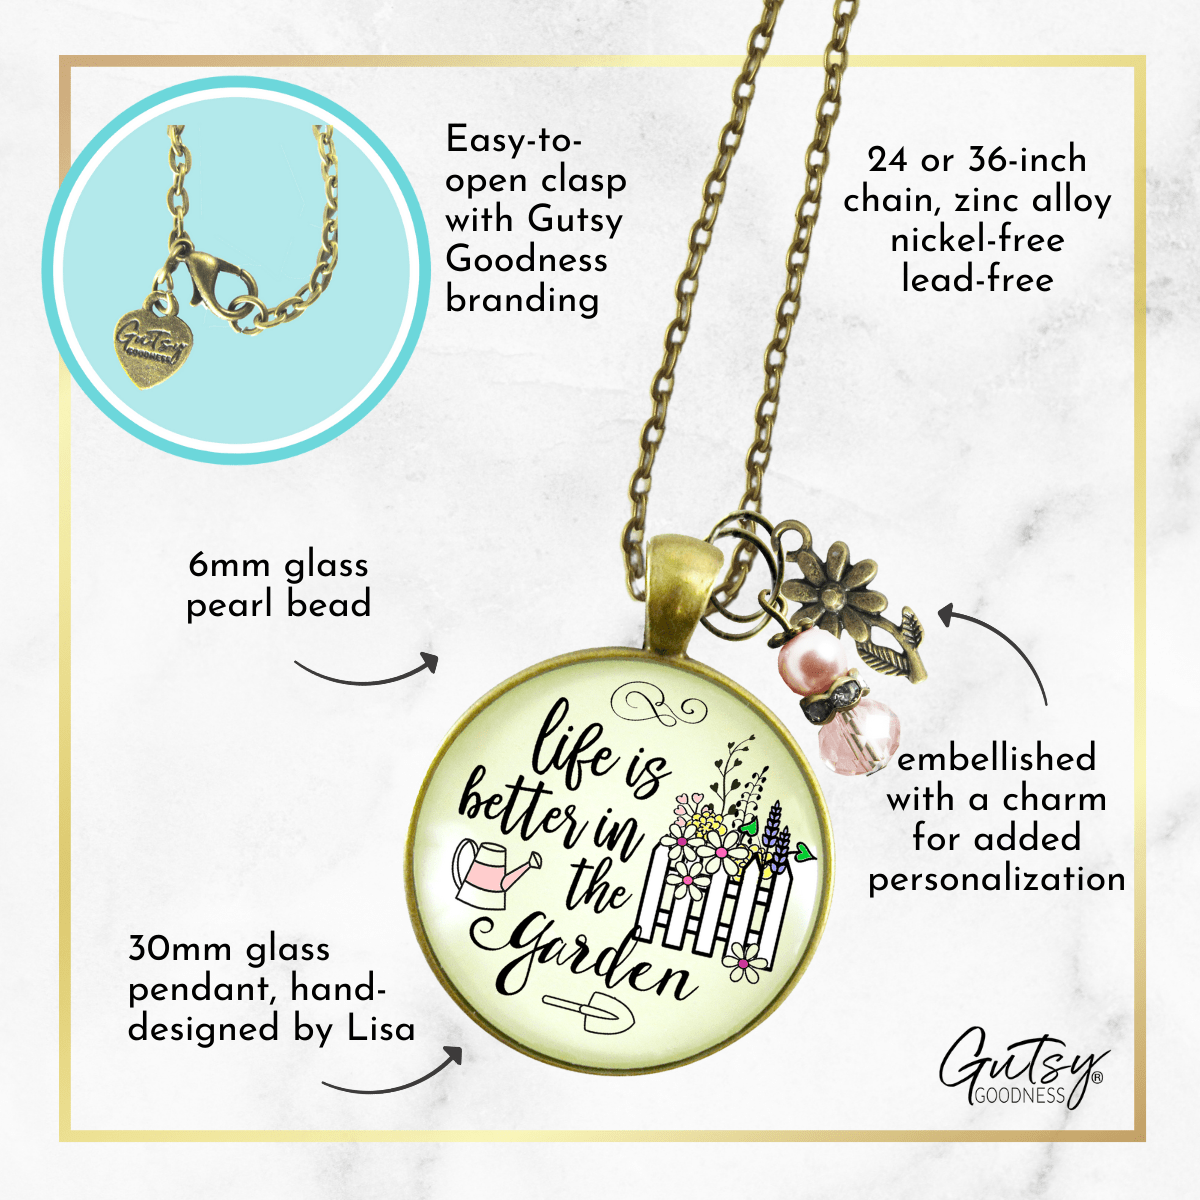 Gutsy Goodness Gardener Necklace Life is Better in Garden Womens Quote Gift Jewelry 24" - Gutsy Goodness;Gardener Necklace Life Is Better In Garden Womens Quote Gift Jewelry 24" - Gutsy Goodness Handmade Jewelry Gifts